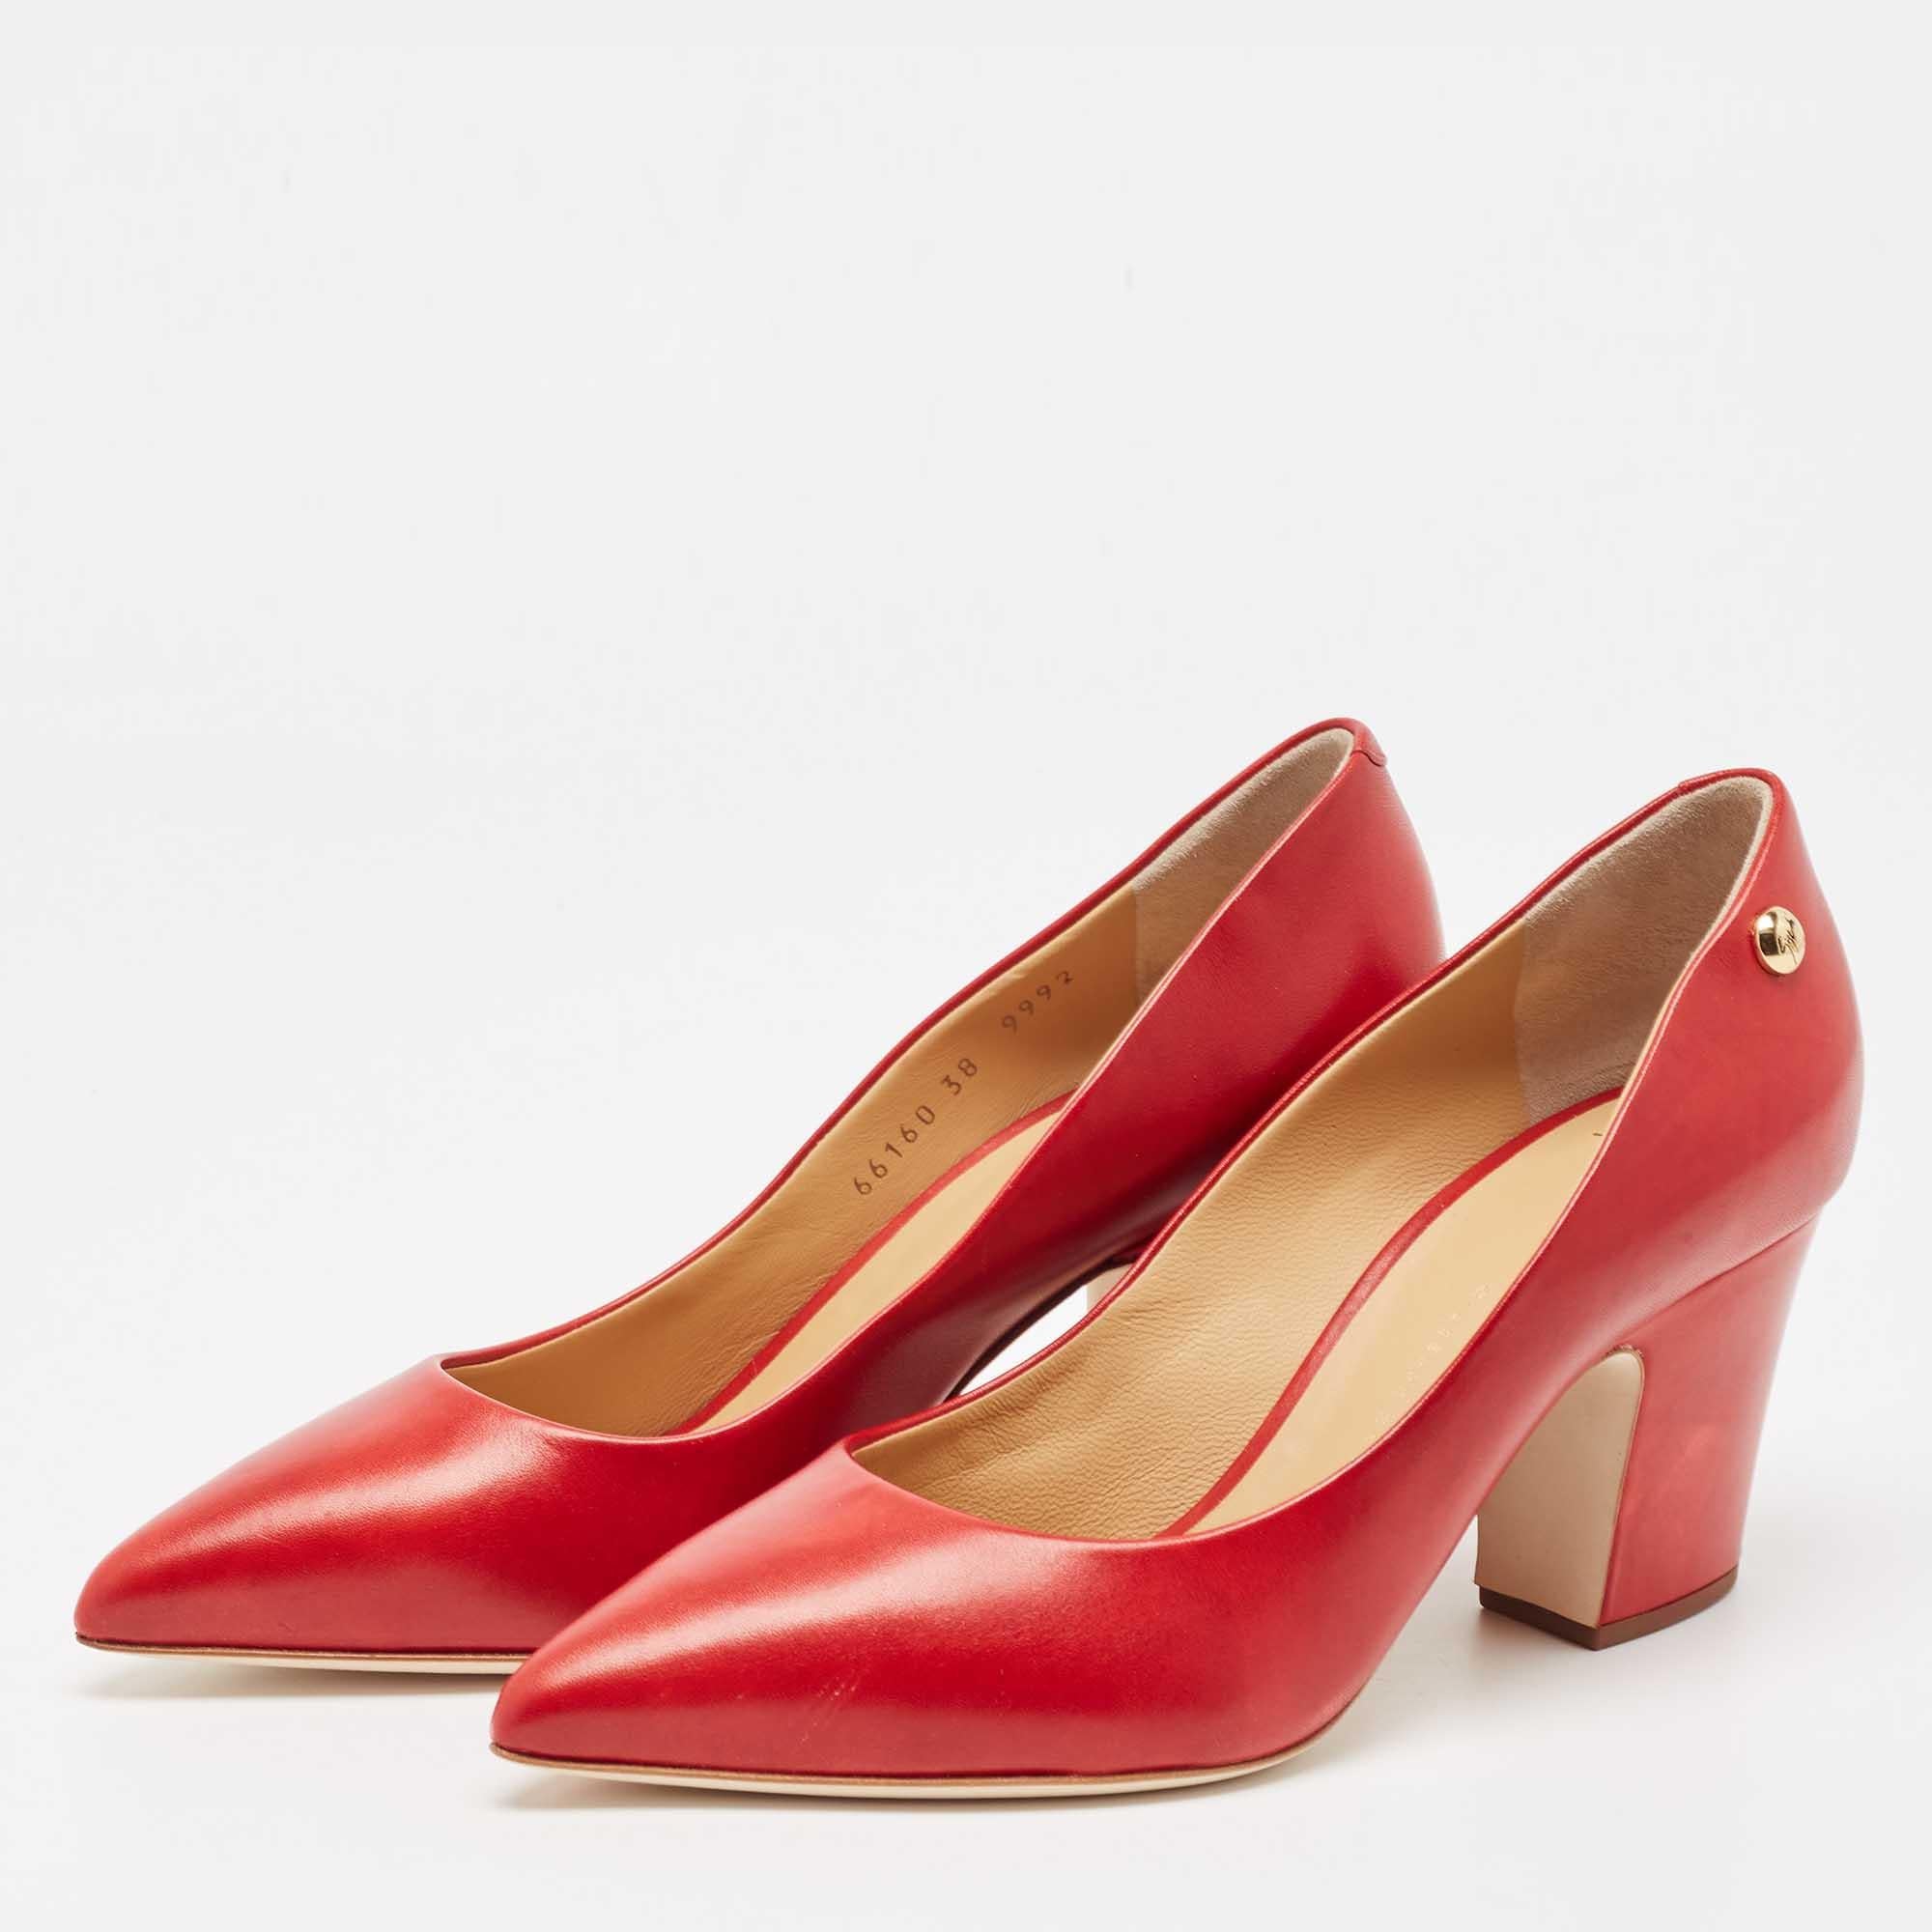 Giuseppe Zanotti Red Leather Pointed Toe Pumps Size 38 3